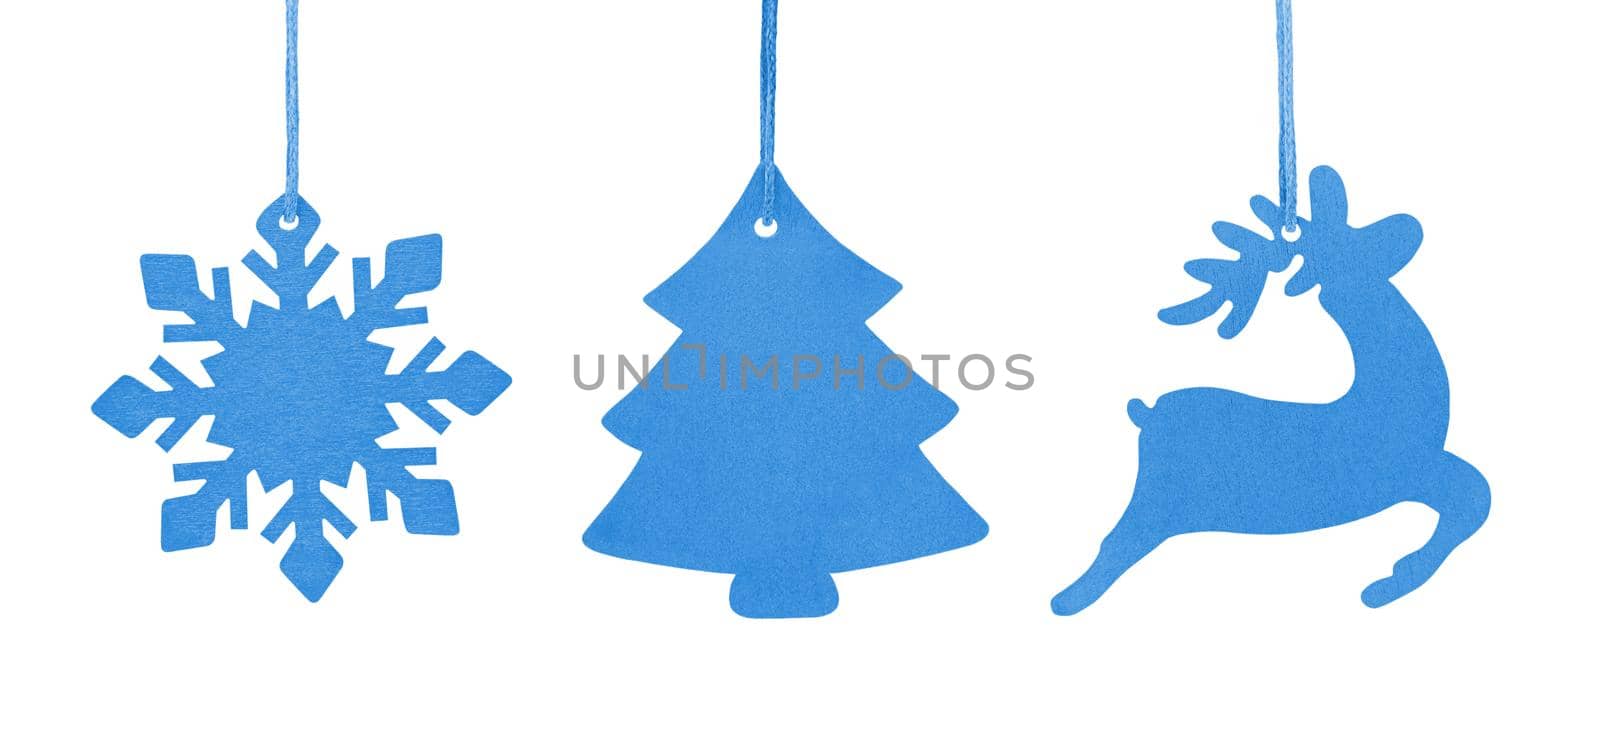 Set of blue hanging wooden ornament Christmas tree, snowflake and deer isolated on a white background.